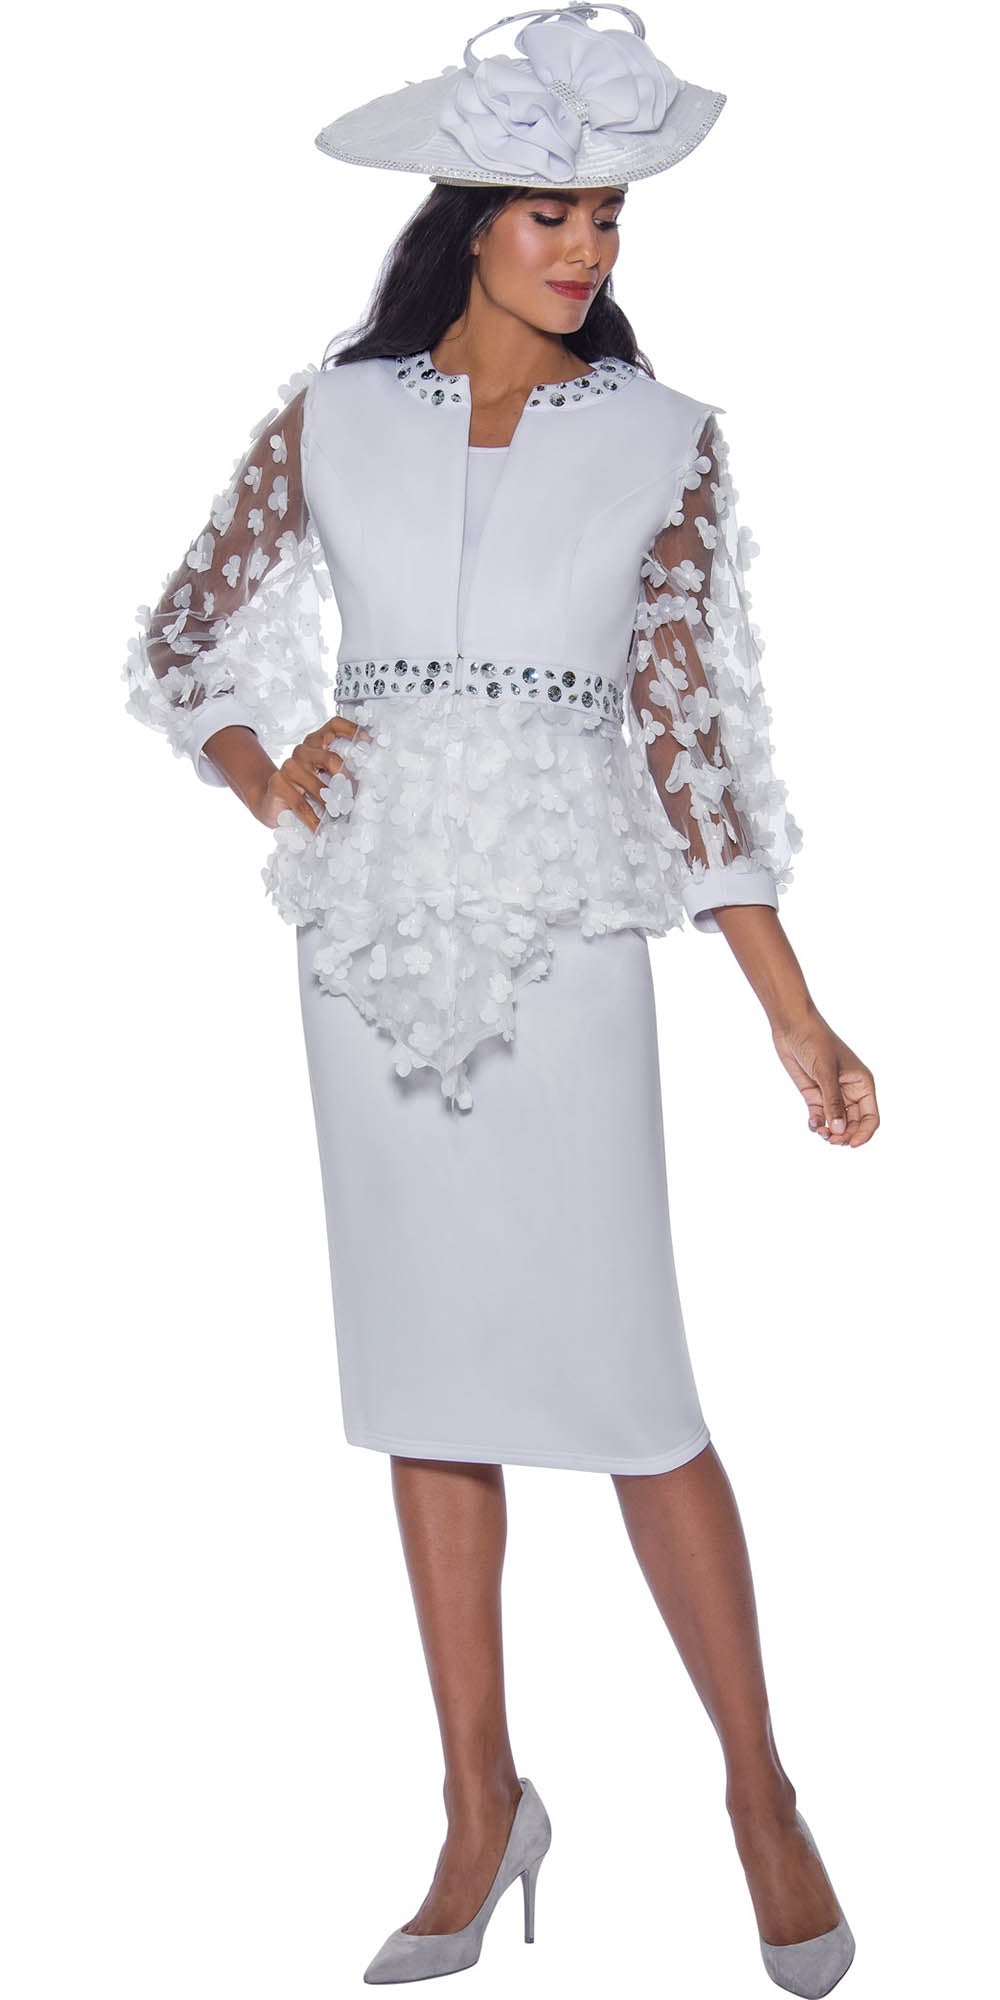 GMI G9673 - White 3PC Scuba Fabric Skirt Suit With Mesh and Petals Detailing